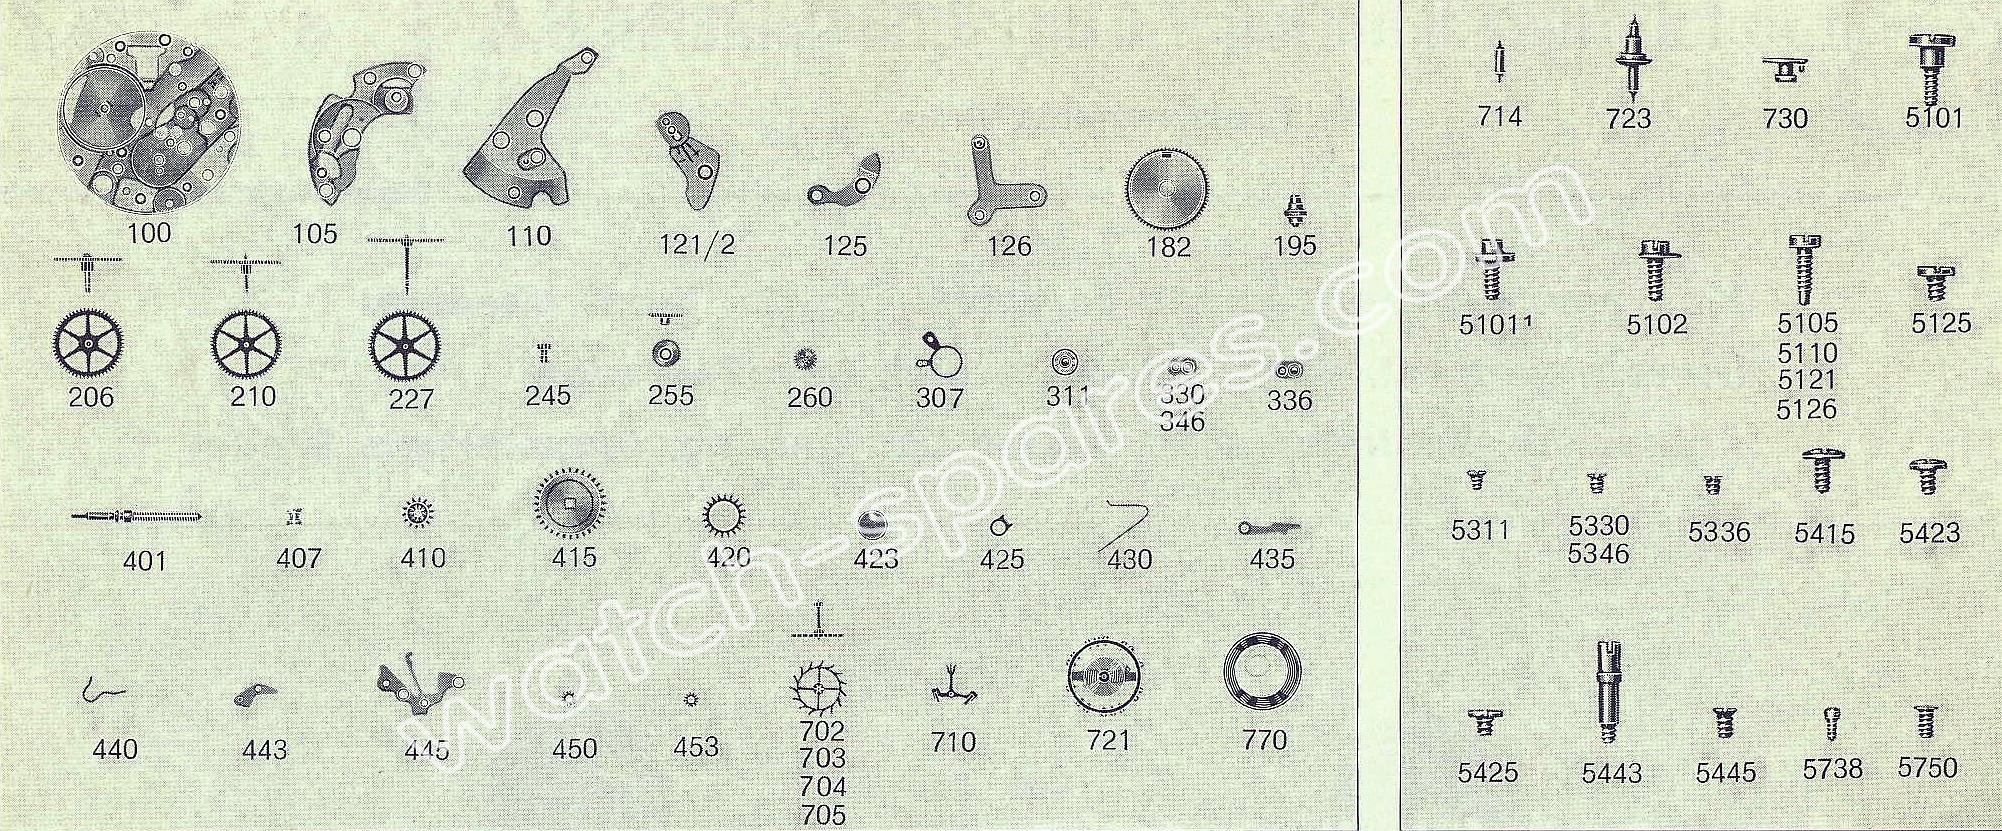 FHF Font 57 watch spare parts